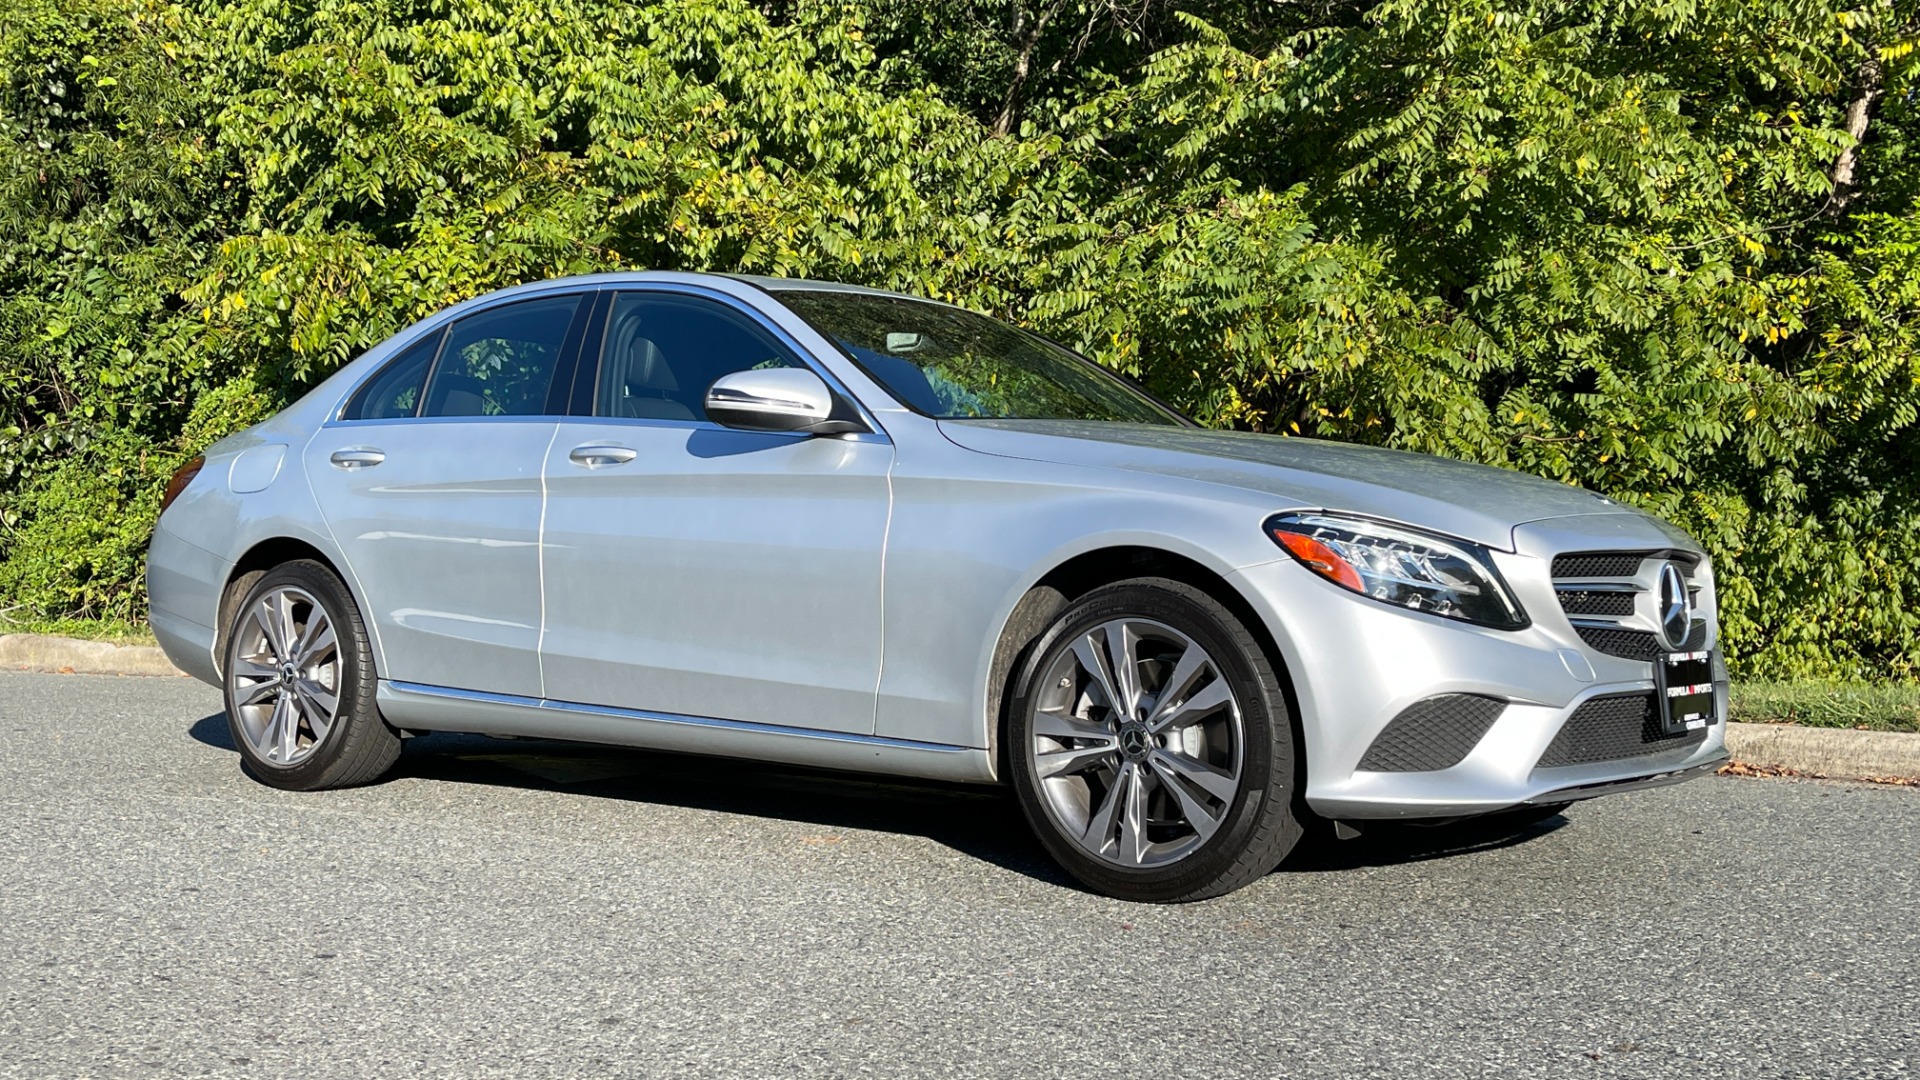 Used 2020 Mercedes-Benz C-Class C300 / BACKUP CAMERA / HEATED SEATS / WOOD GRAIN TRIM for sale $36,395 at Formula Imports in Charlotte NC 28227 7